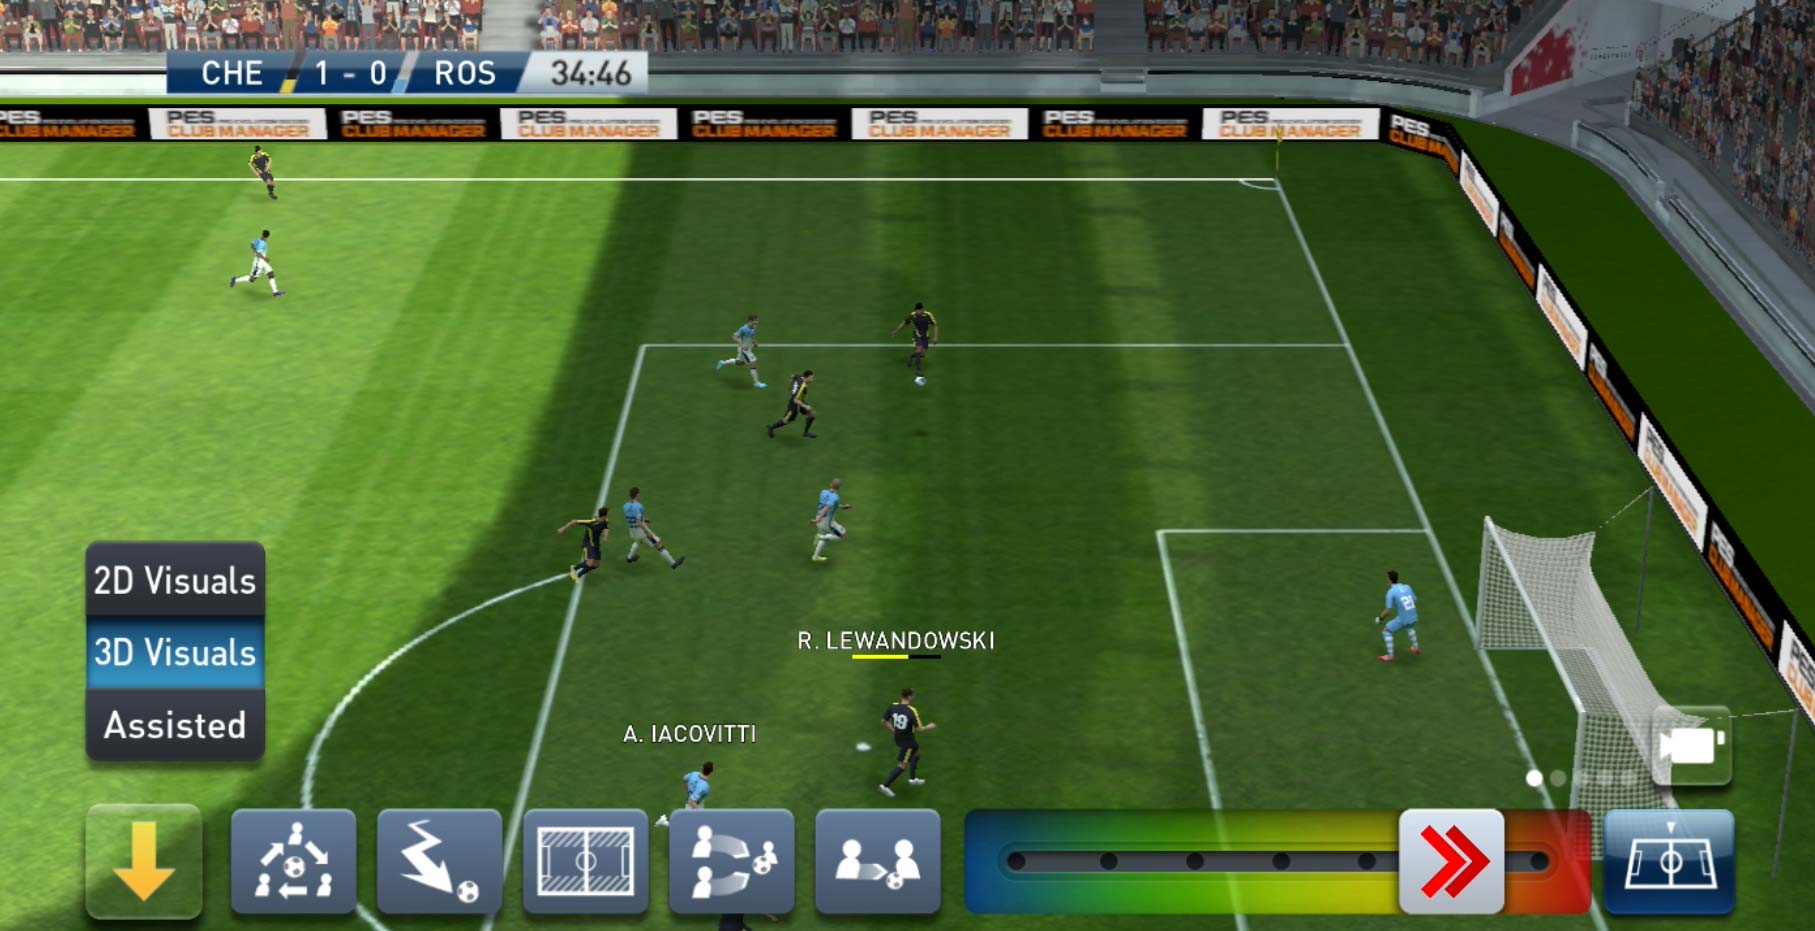 PES CLUB MANAGER 4.1.1 2021 Android Offline Best Graphics & Transfers Update